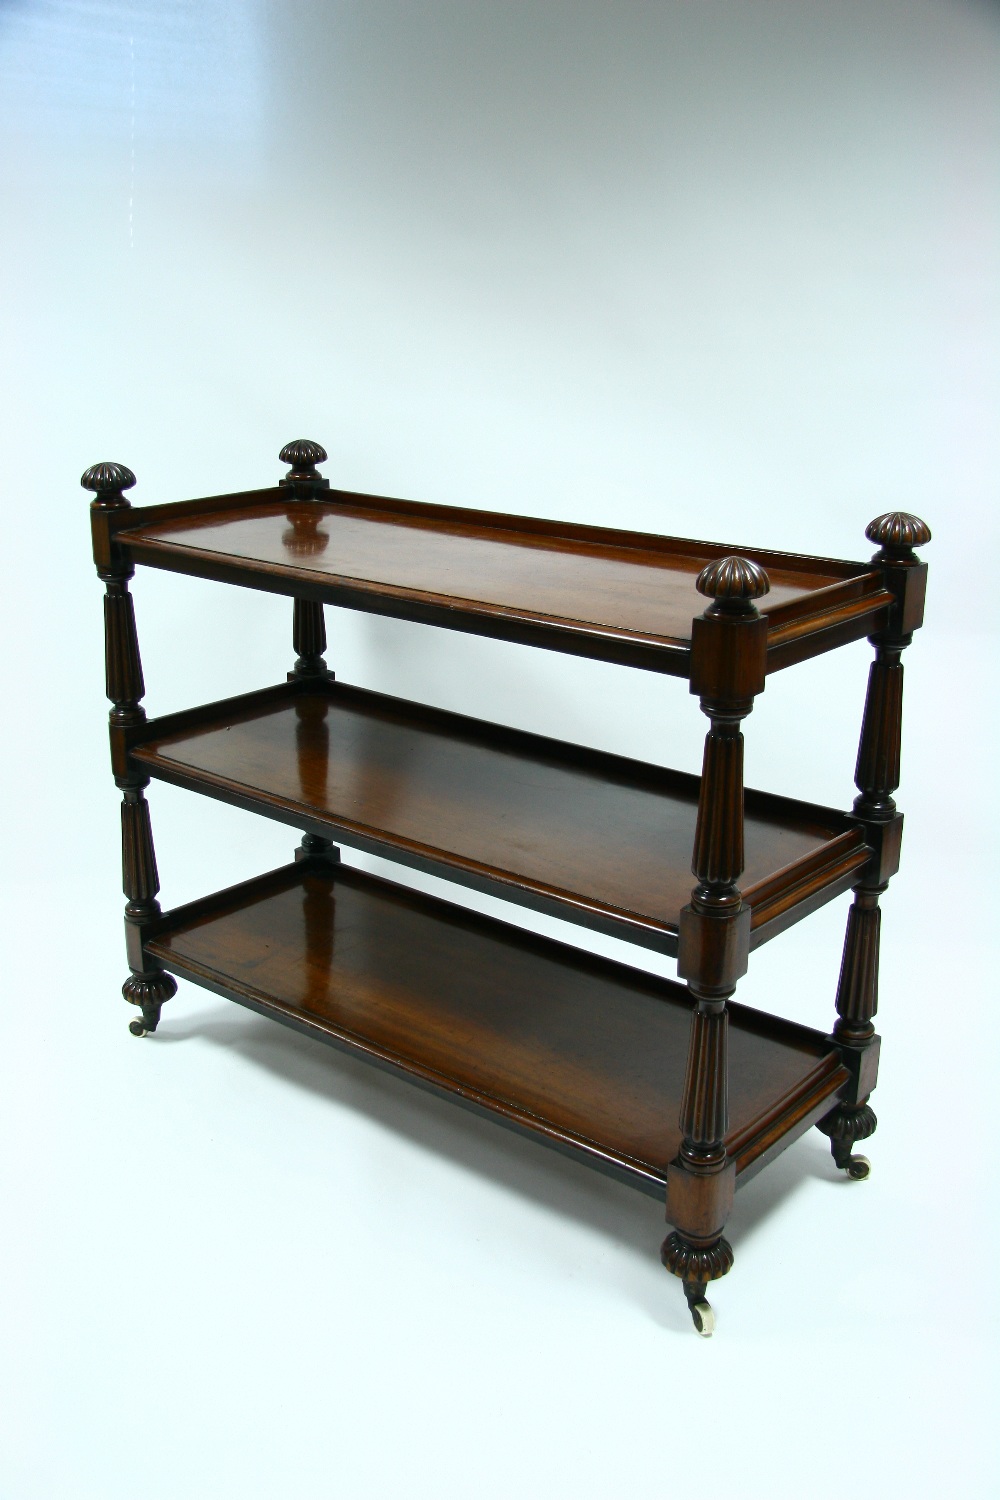 A Victorian mahogany three-tier dumb waiter with reeded tapered supports, finials, & bun feet with